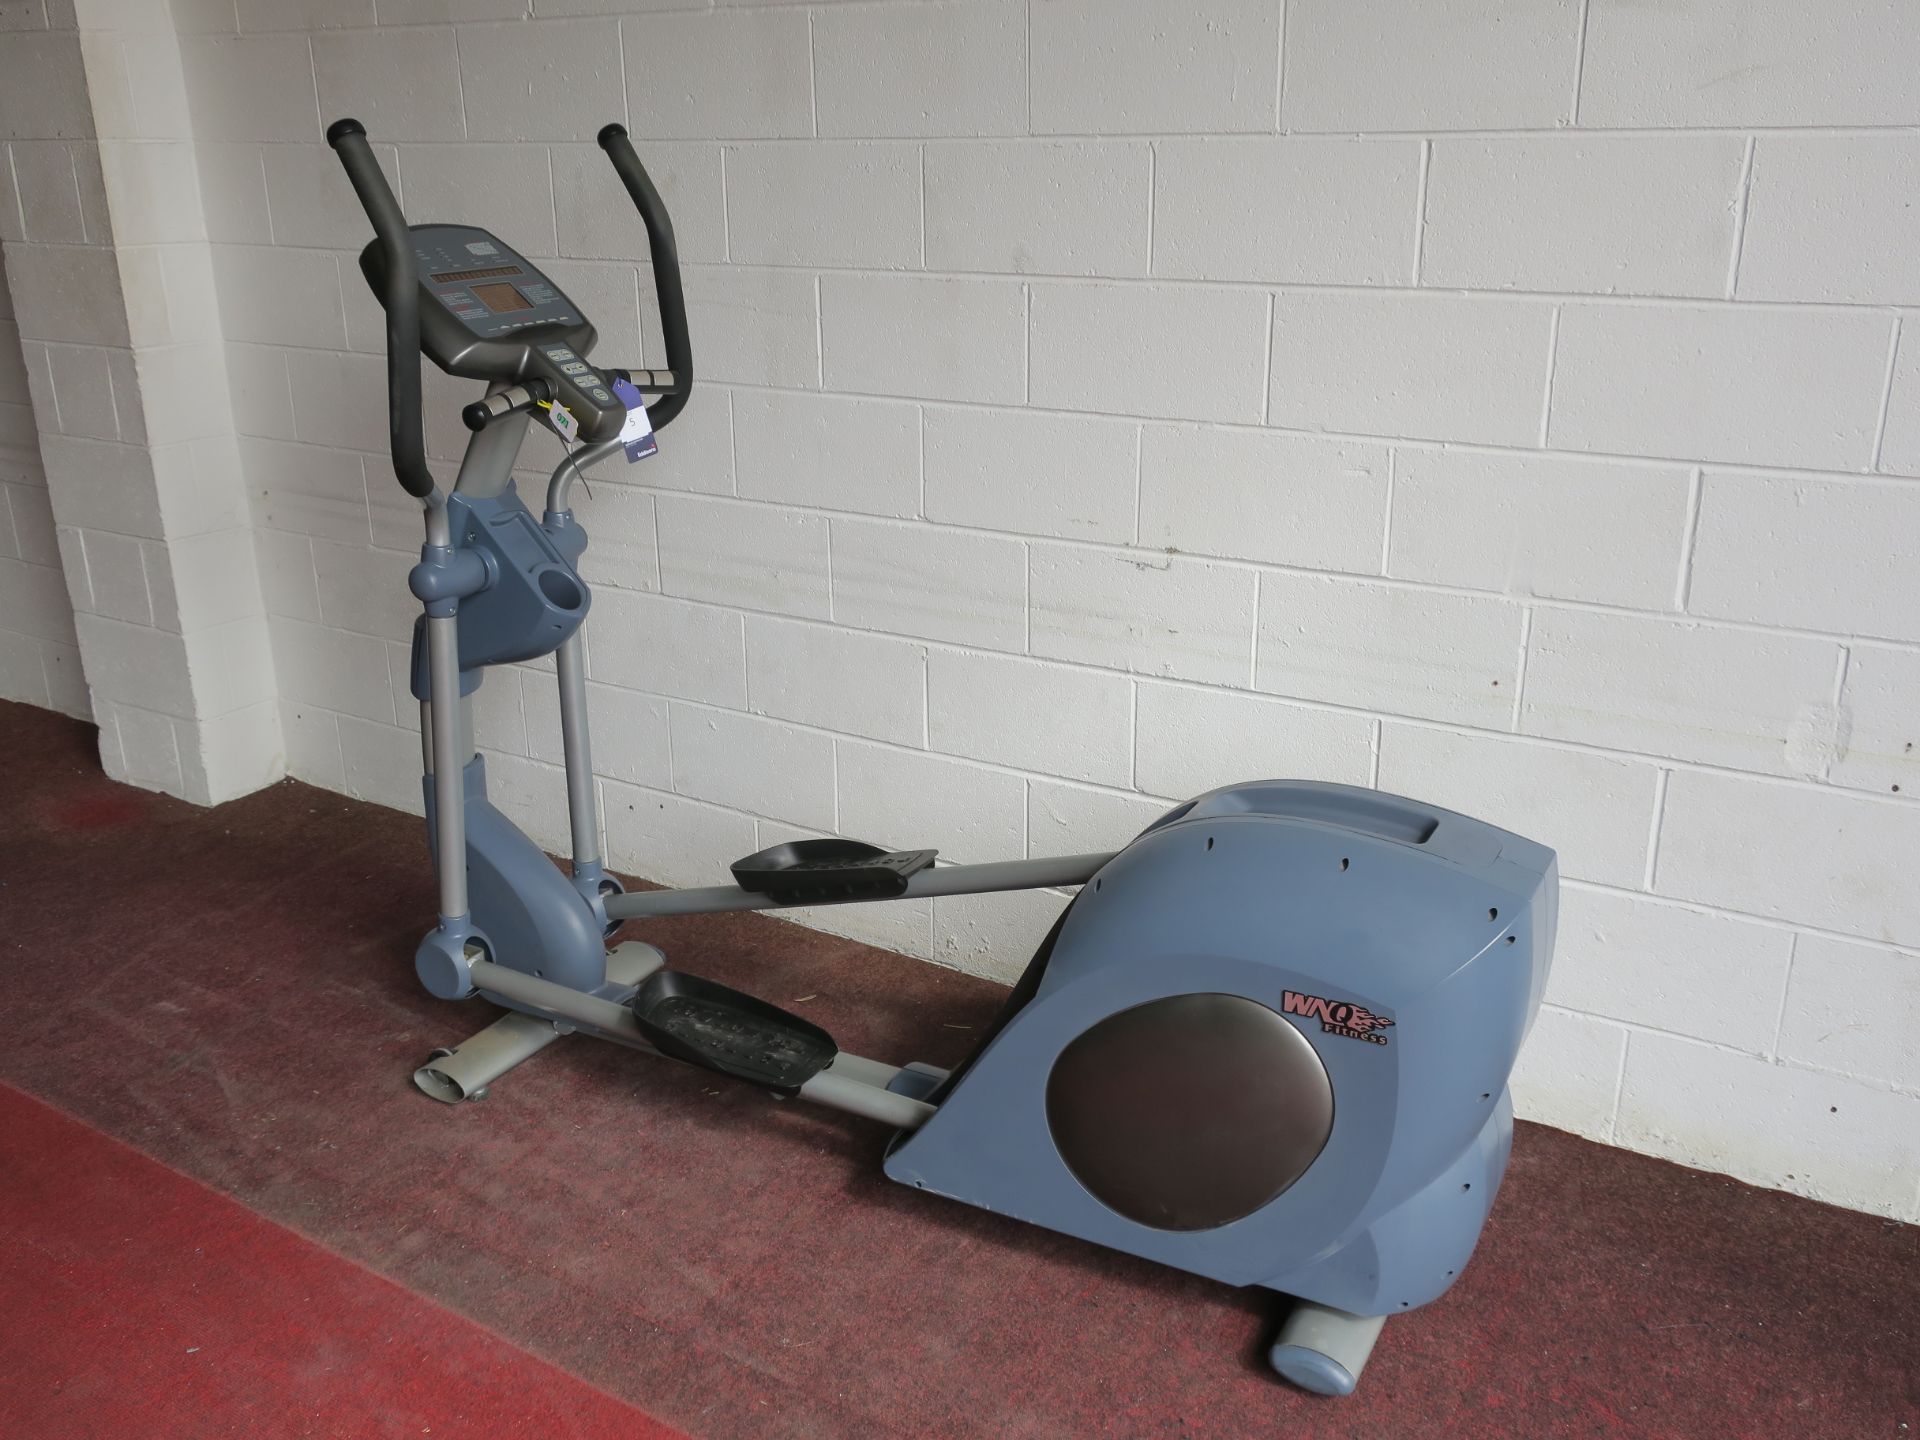 * A WNQ Fitness Eliptical Cross Trainer Model F1-8618A complete with heart rate monitor. Please note - Image 2 of 4